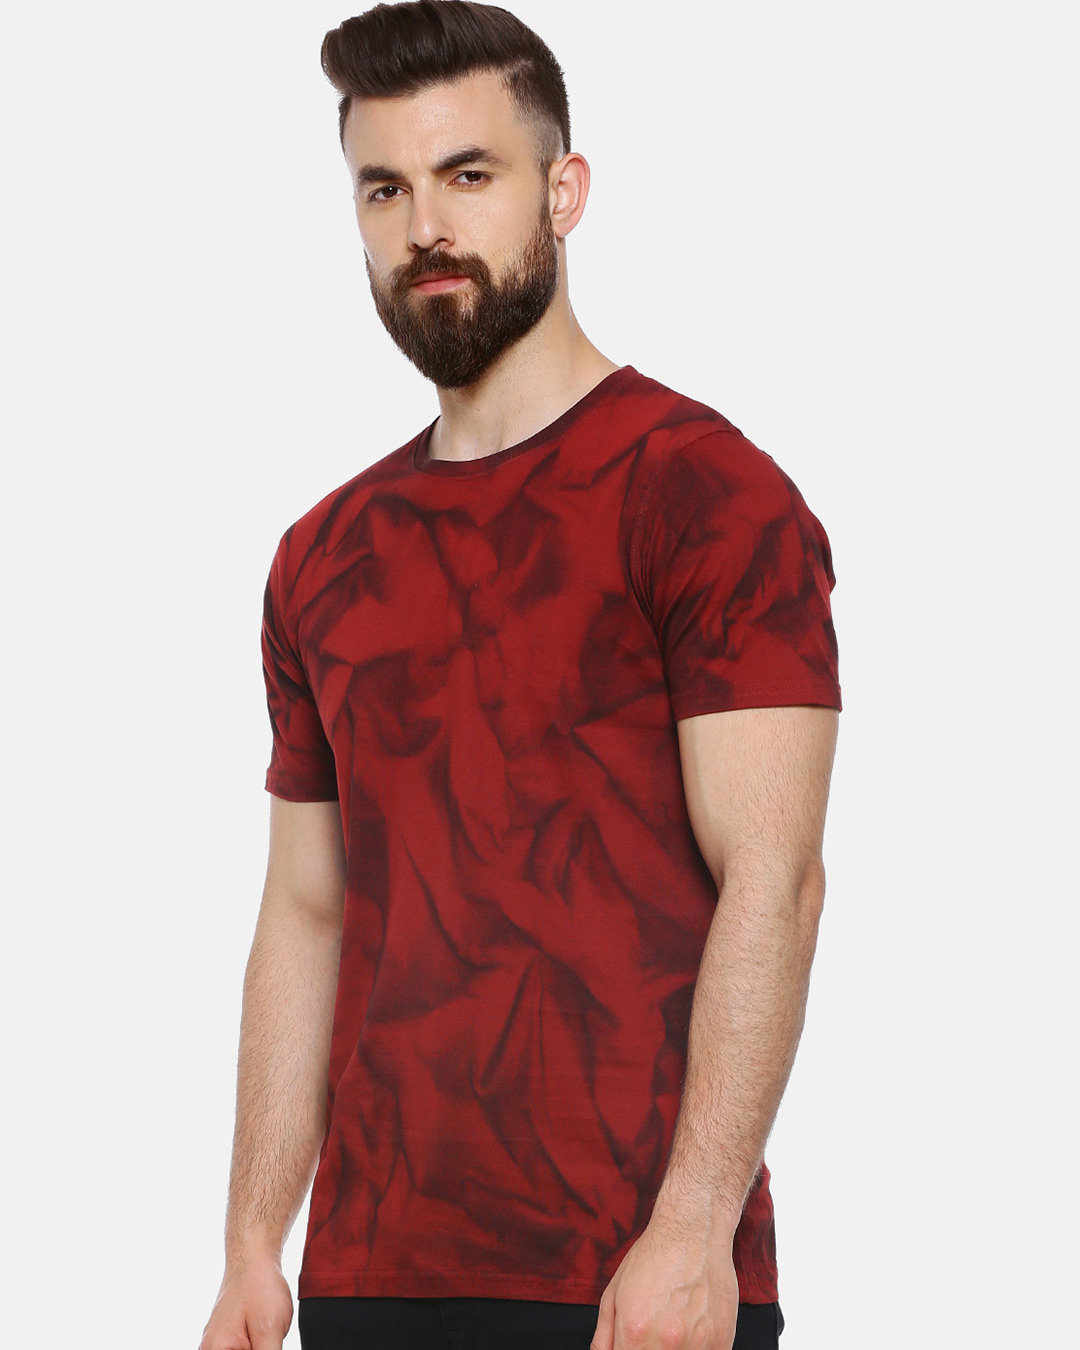 Shop Graphic Print Men's Round or Crew Maroon T-Shirt-Back